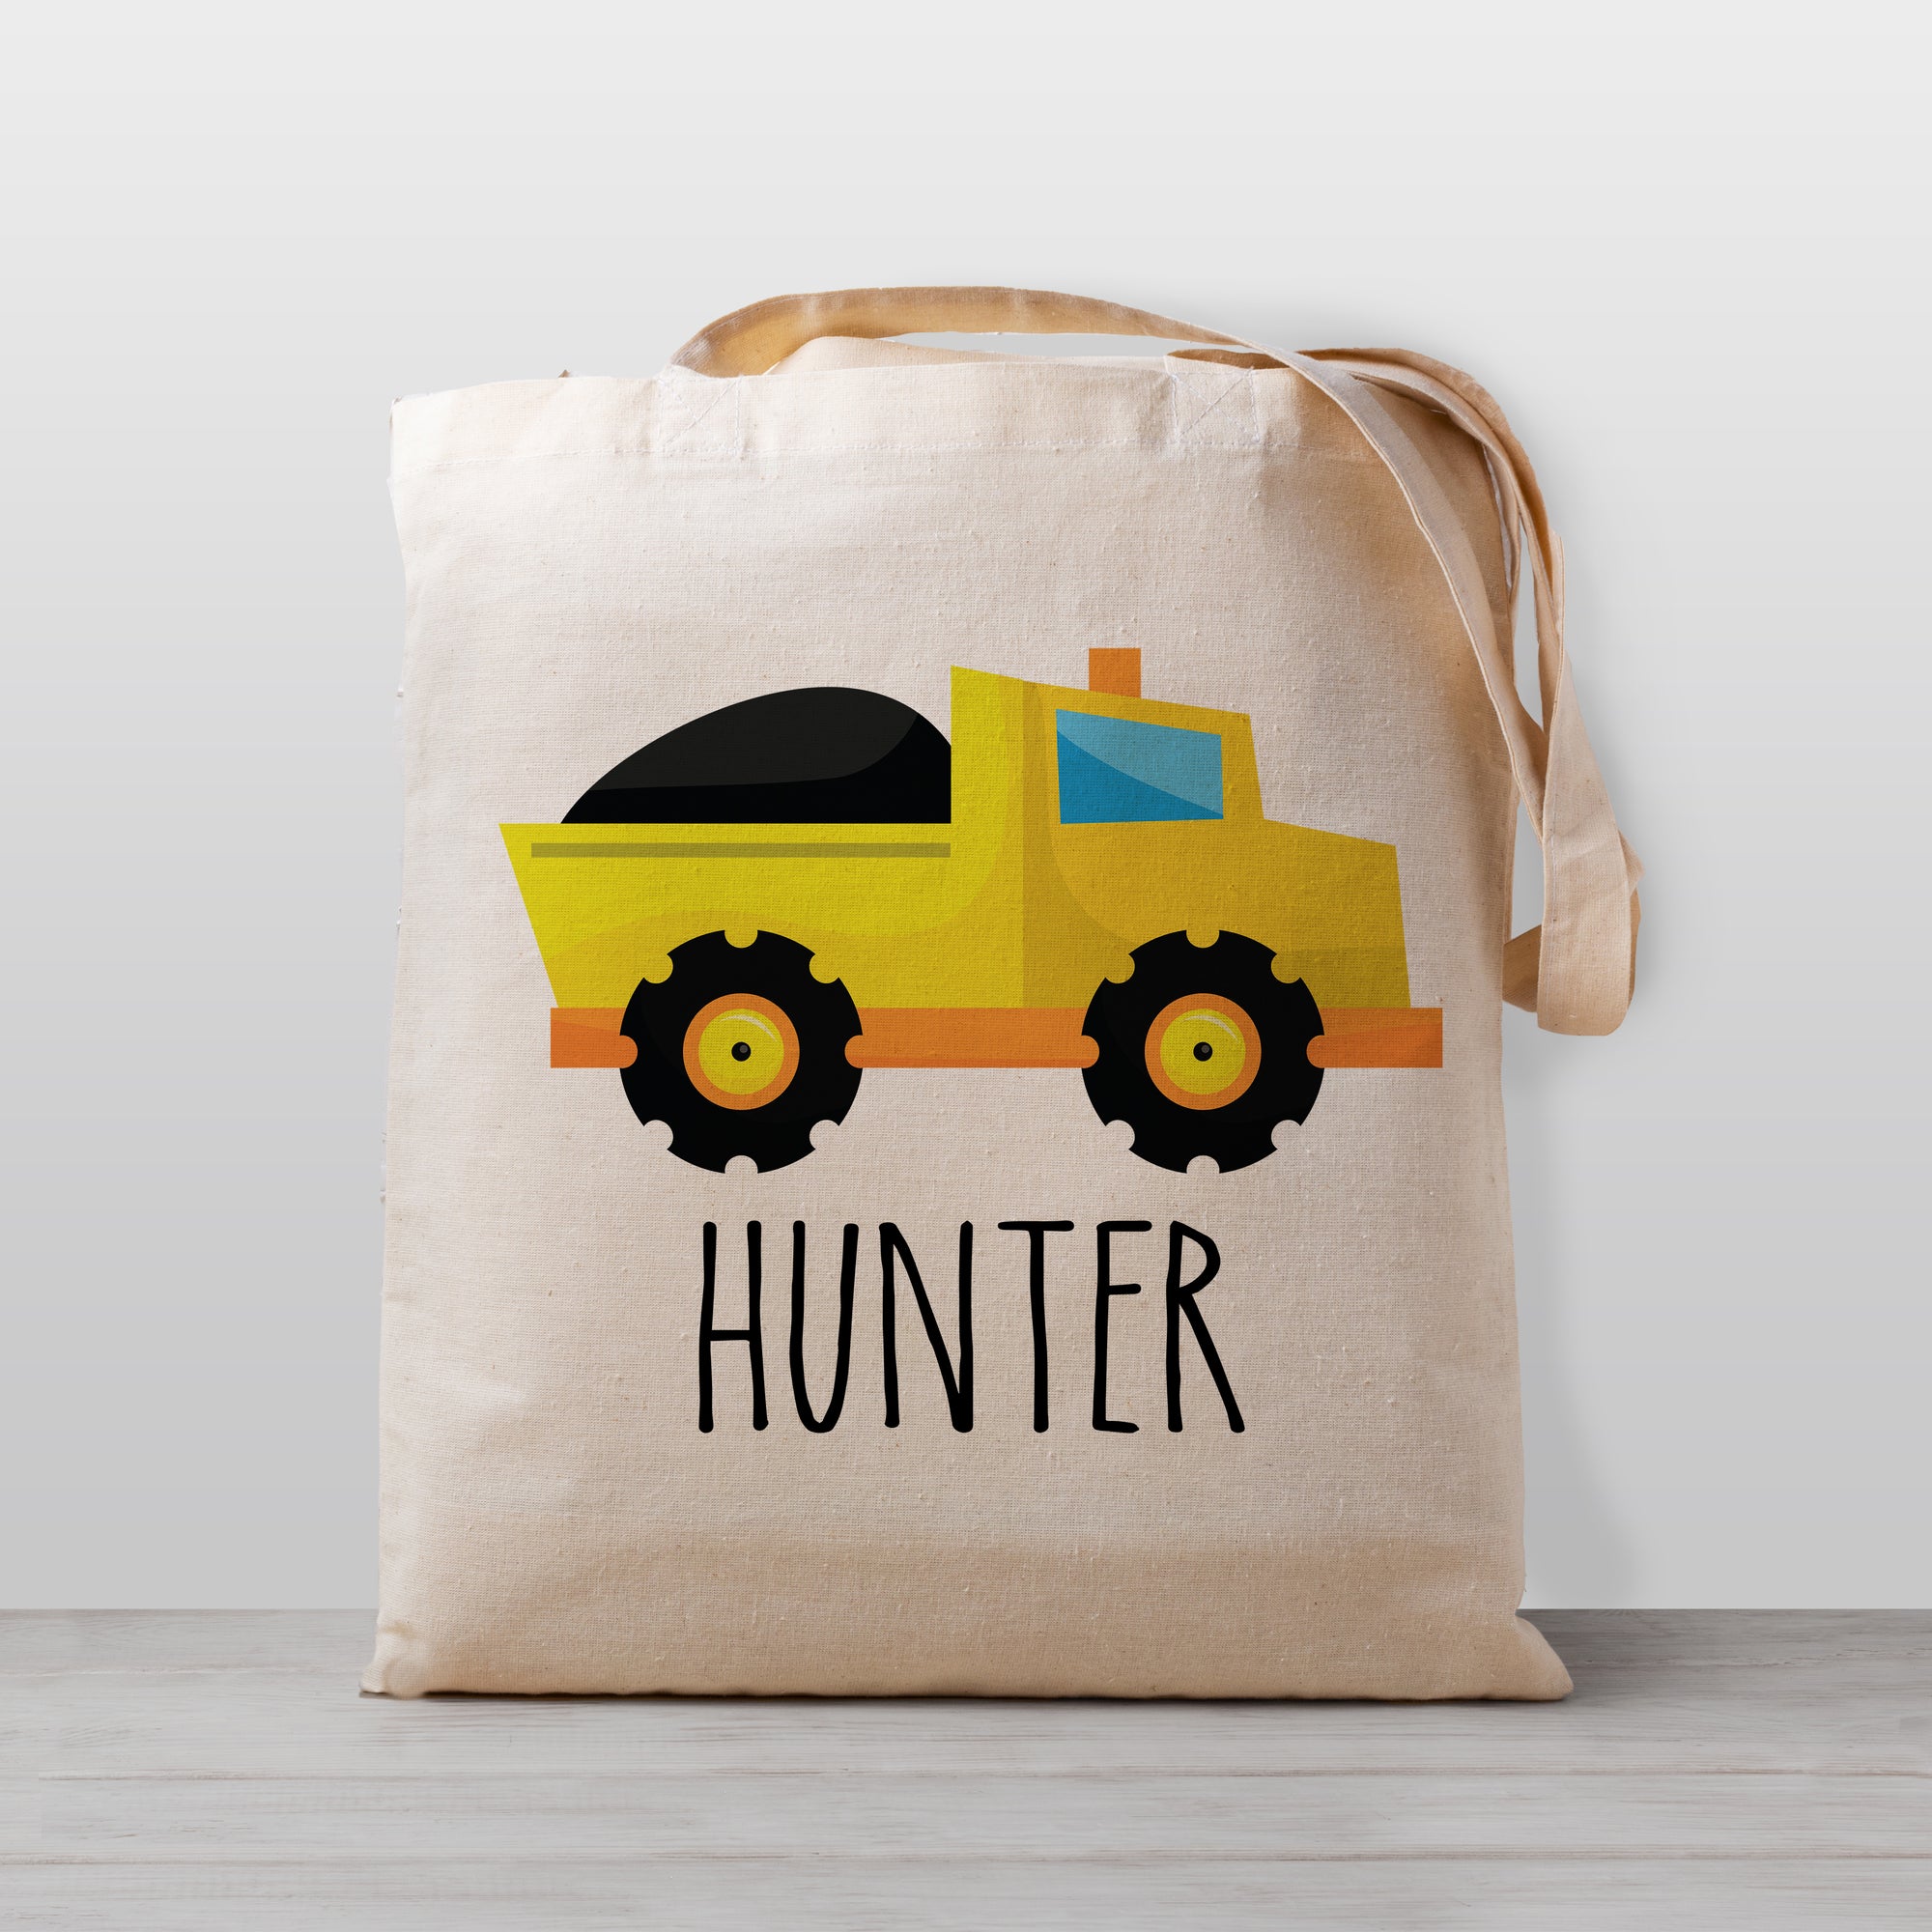 Dump truck personalized tote bag, for boys or girls, 100% natural cotton canvas